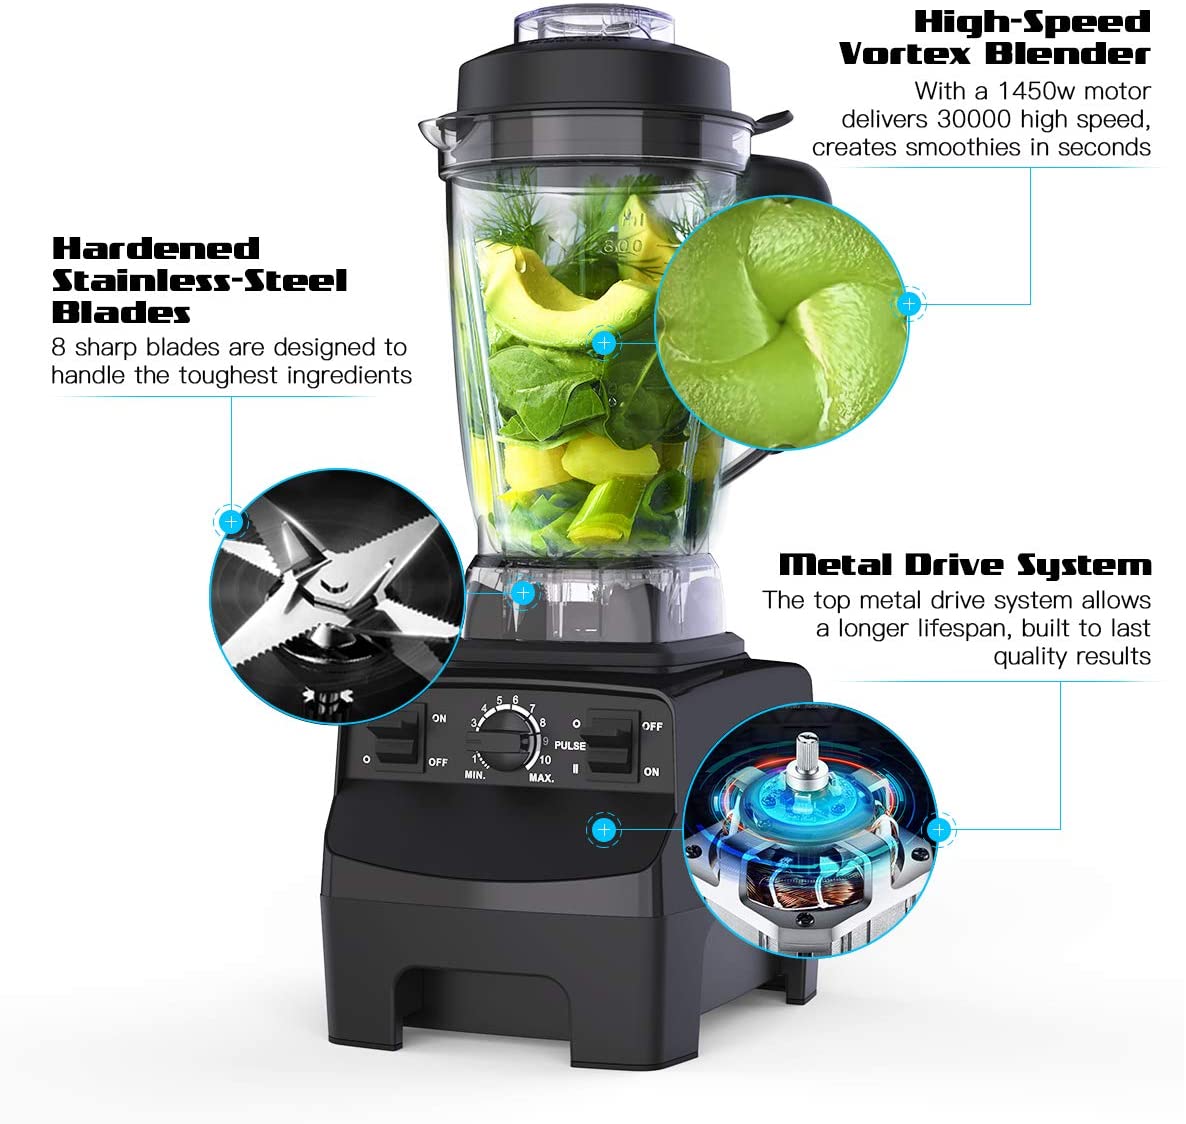 Homgeek blender, 1450W high speed professional table mixer, suitable for milkshakes and smoothies, 30000 rpm, built-in pulse and 10 speed control - image 3 of 7